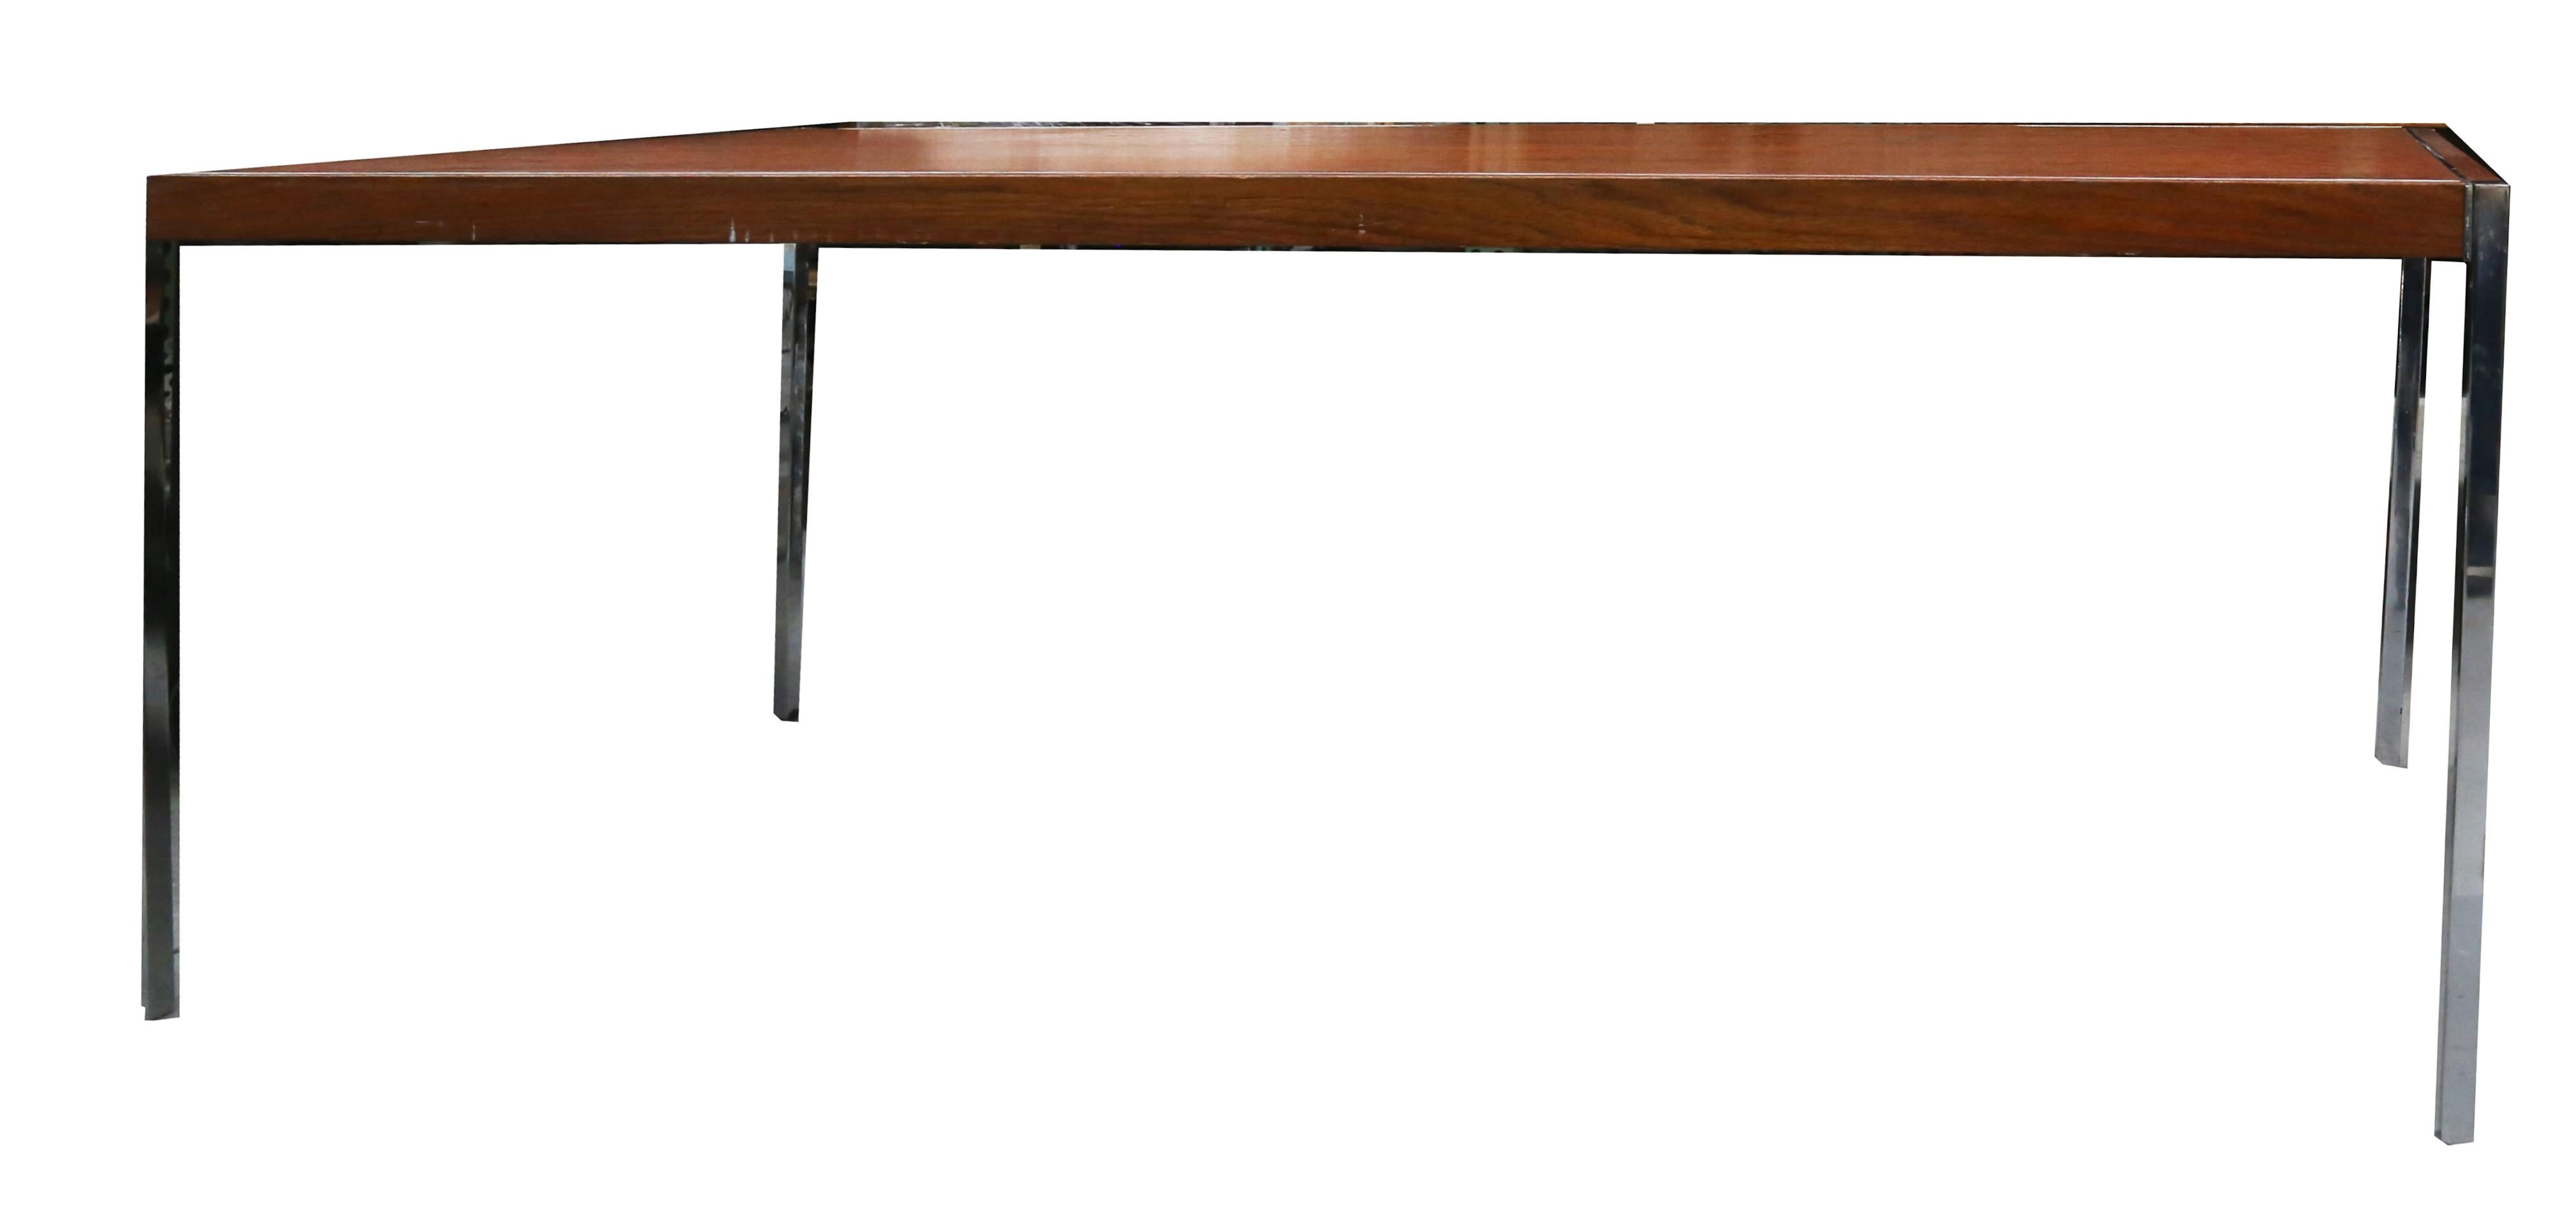 American Rare Richard Schultz Rosewood and Stainless Steel Dining Table/Desk by Knoll